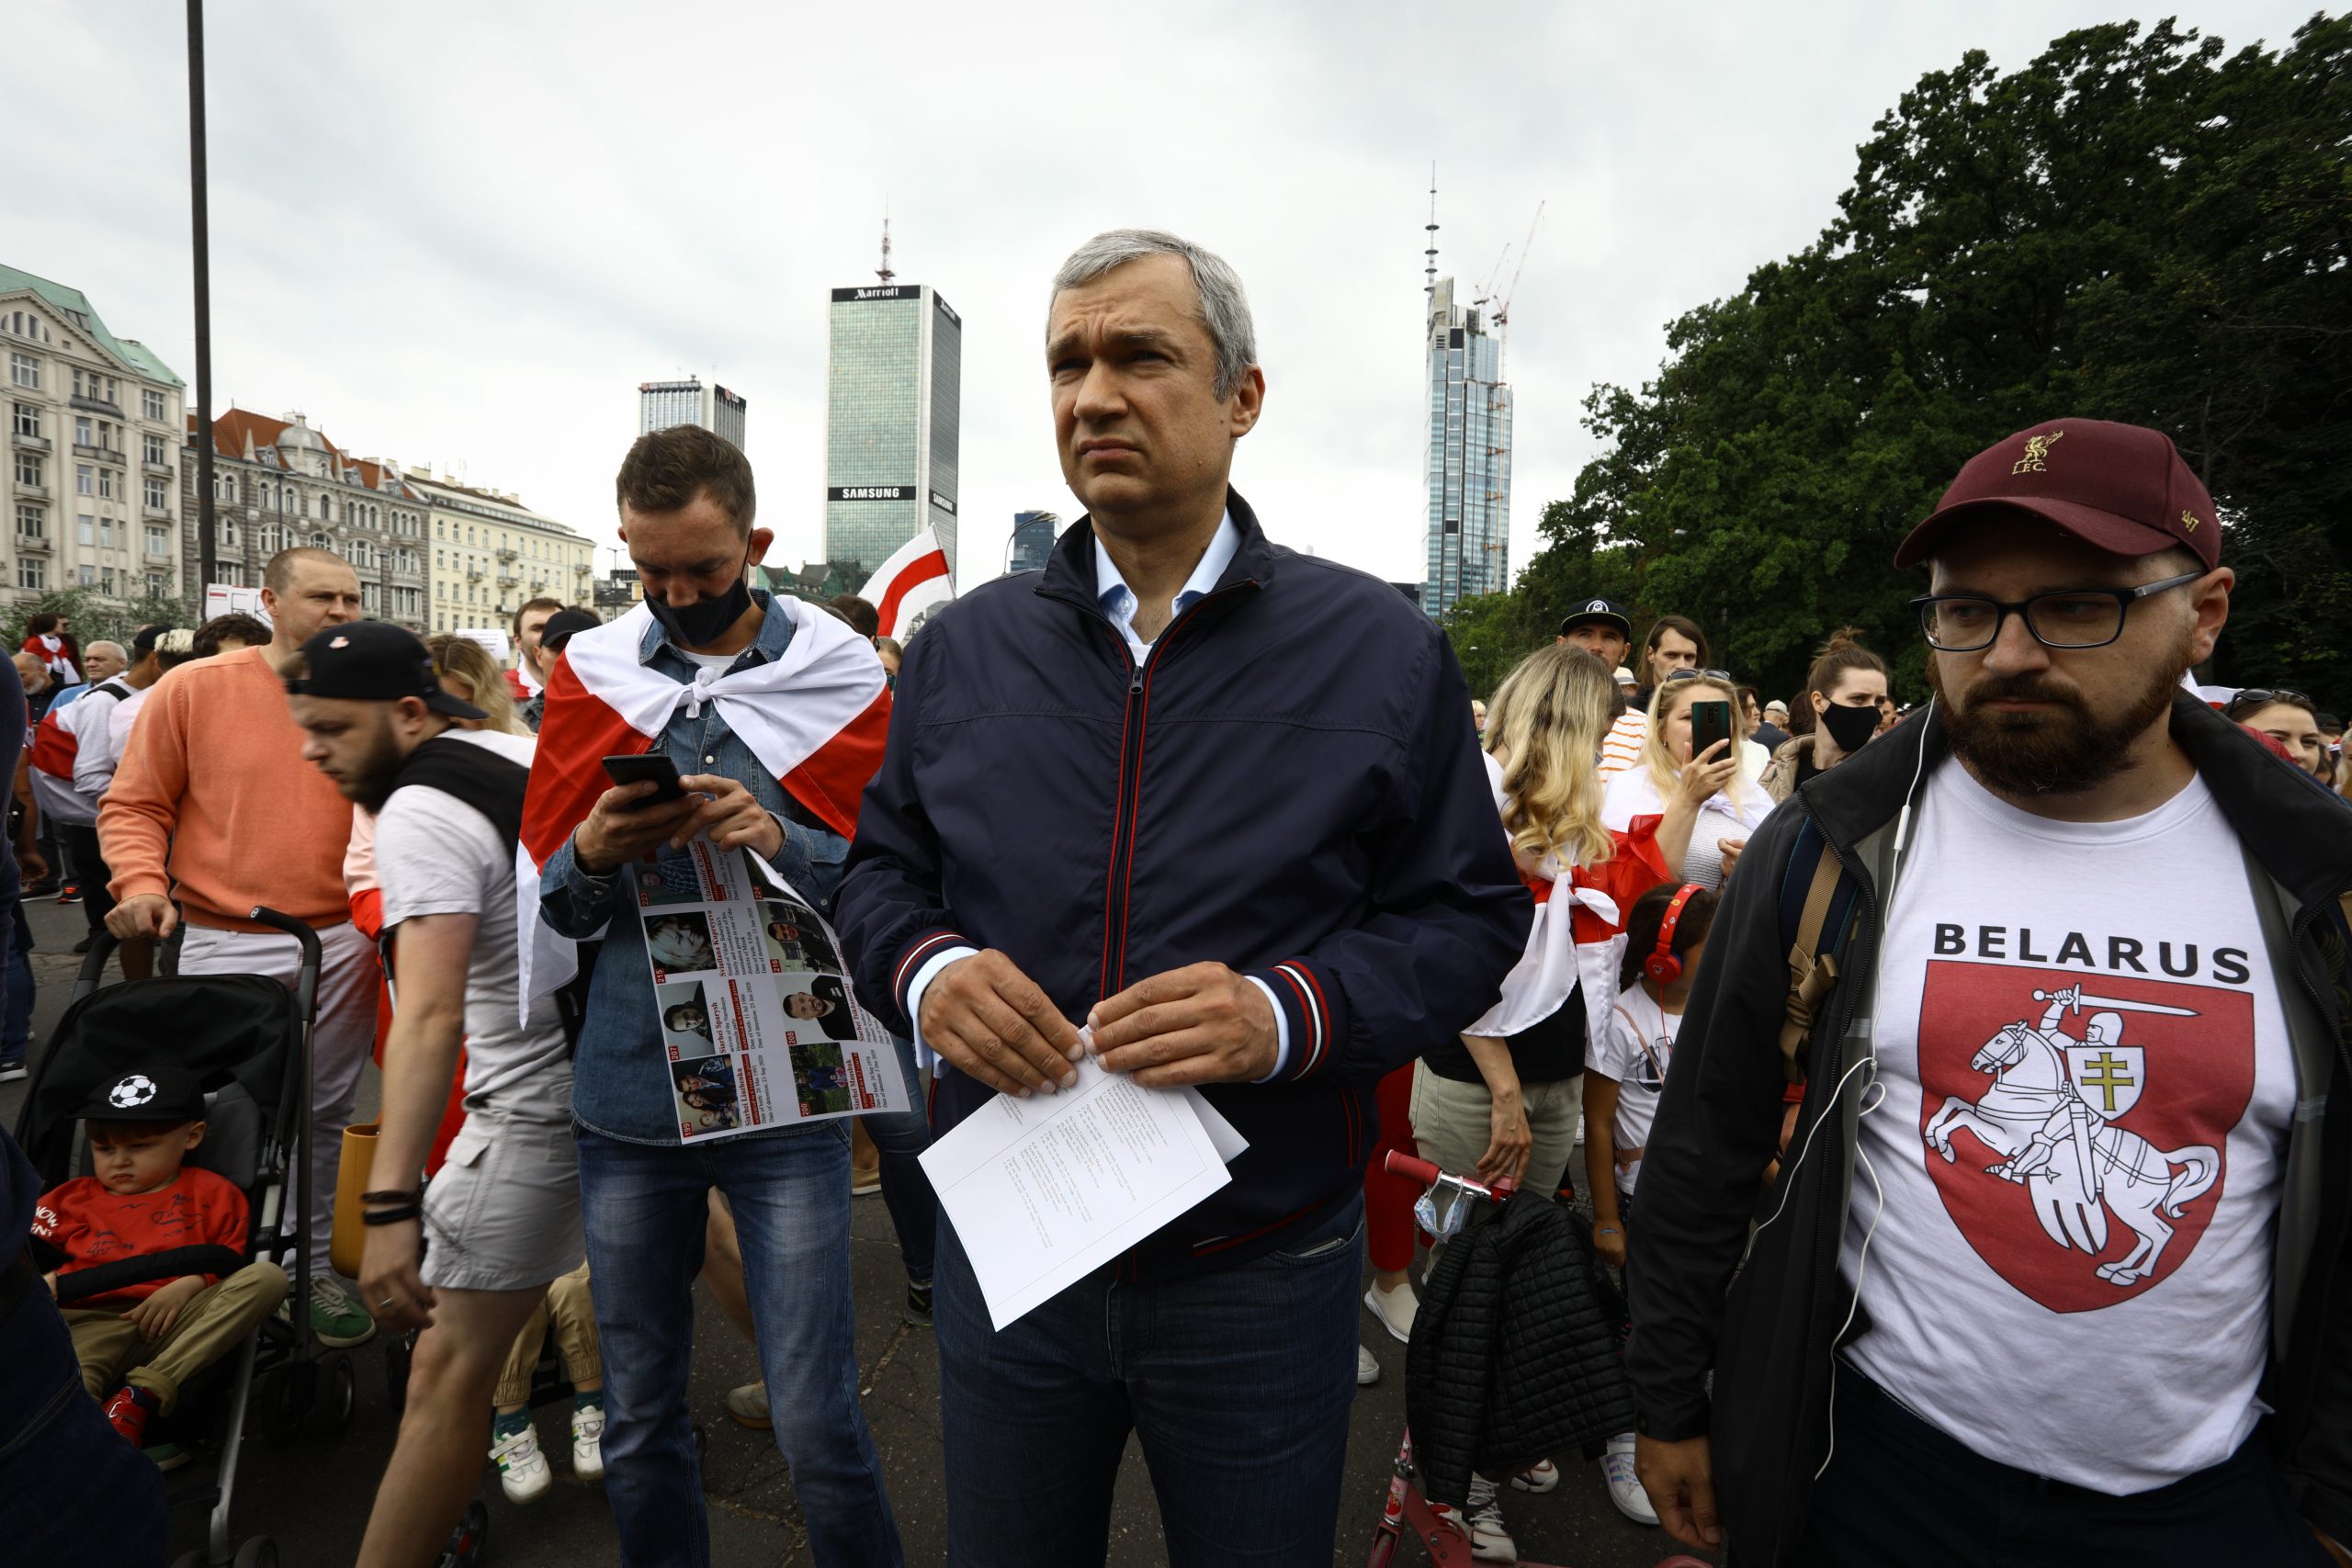 Photo: Belarusian opposition leader and former minister of culture Pavel Latushko is seen at an opposition rally in Warsaw, Poland on Augus 8, 2021. Several hundred people marched from the city center to the Belarusian embassy on Sunday in protest of political repression in their home country on the eve of the anniversary of the rigged elections that led to a sixth term of Alexander Lukashenko as president. Credit: STR/NurPhoto